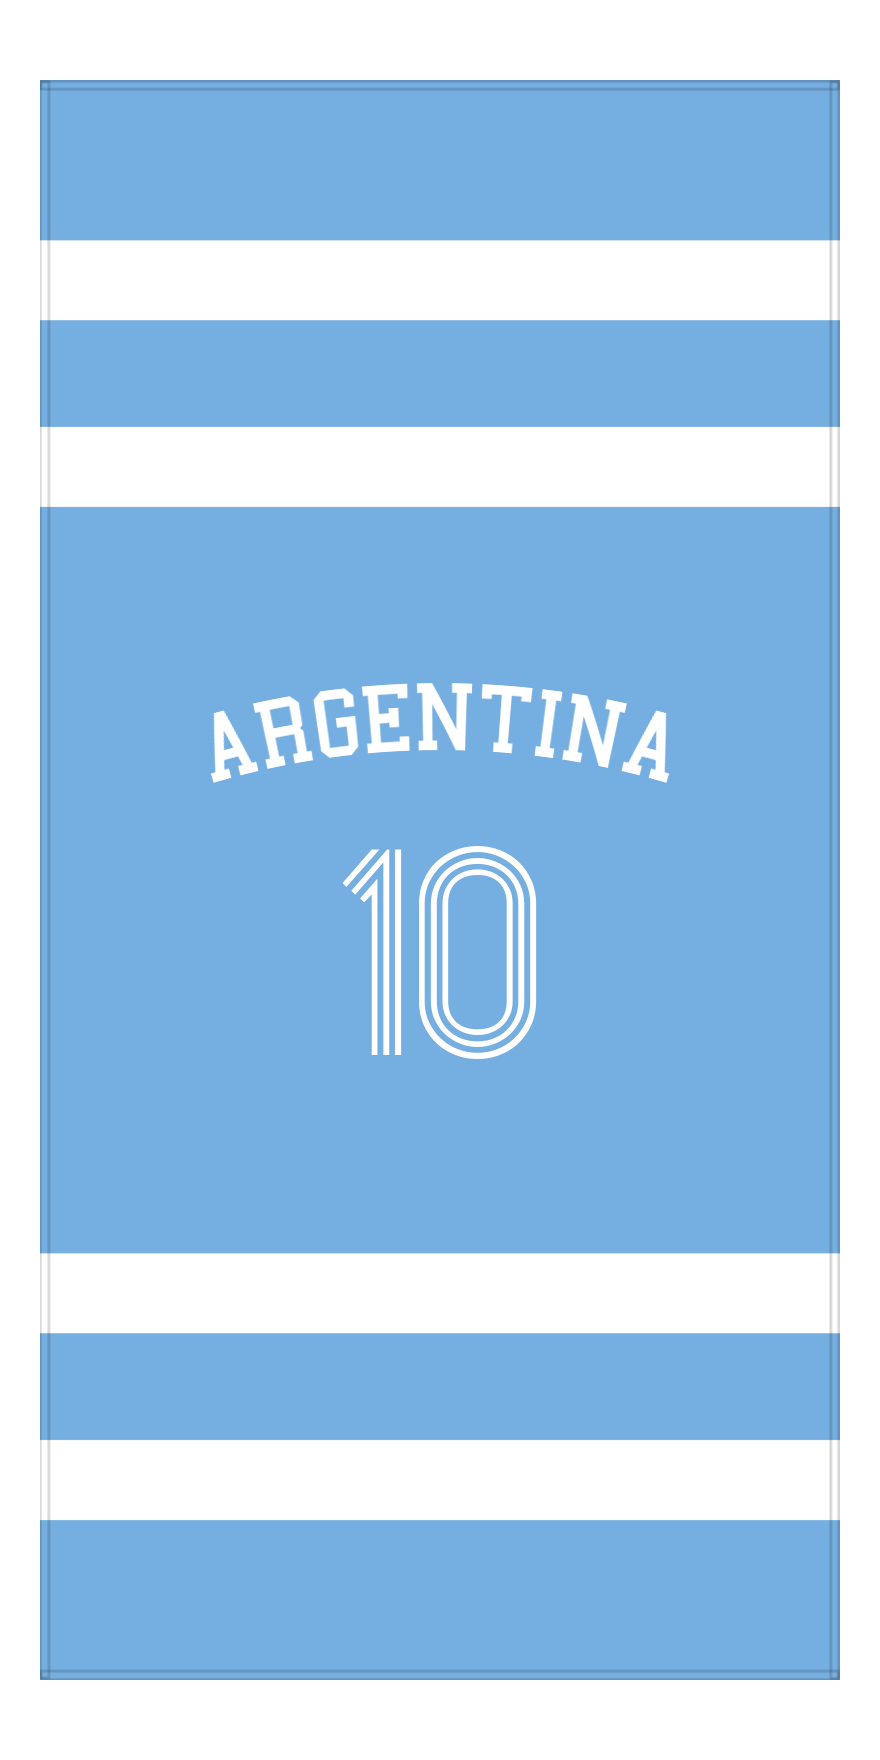 Personalized Jersey Number 1-on-1 Stripes Sports Beach Towel with Arched Name - Argentina - Vertical Design - Front View